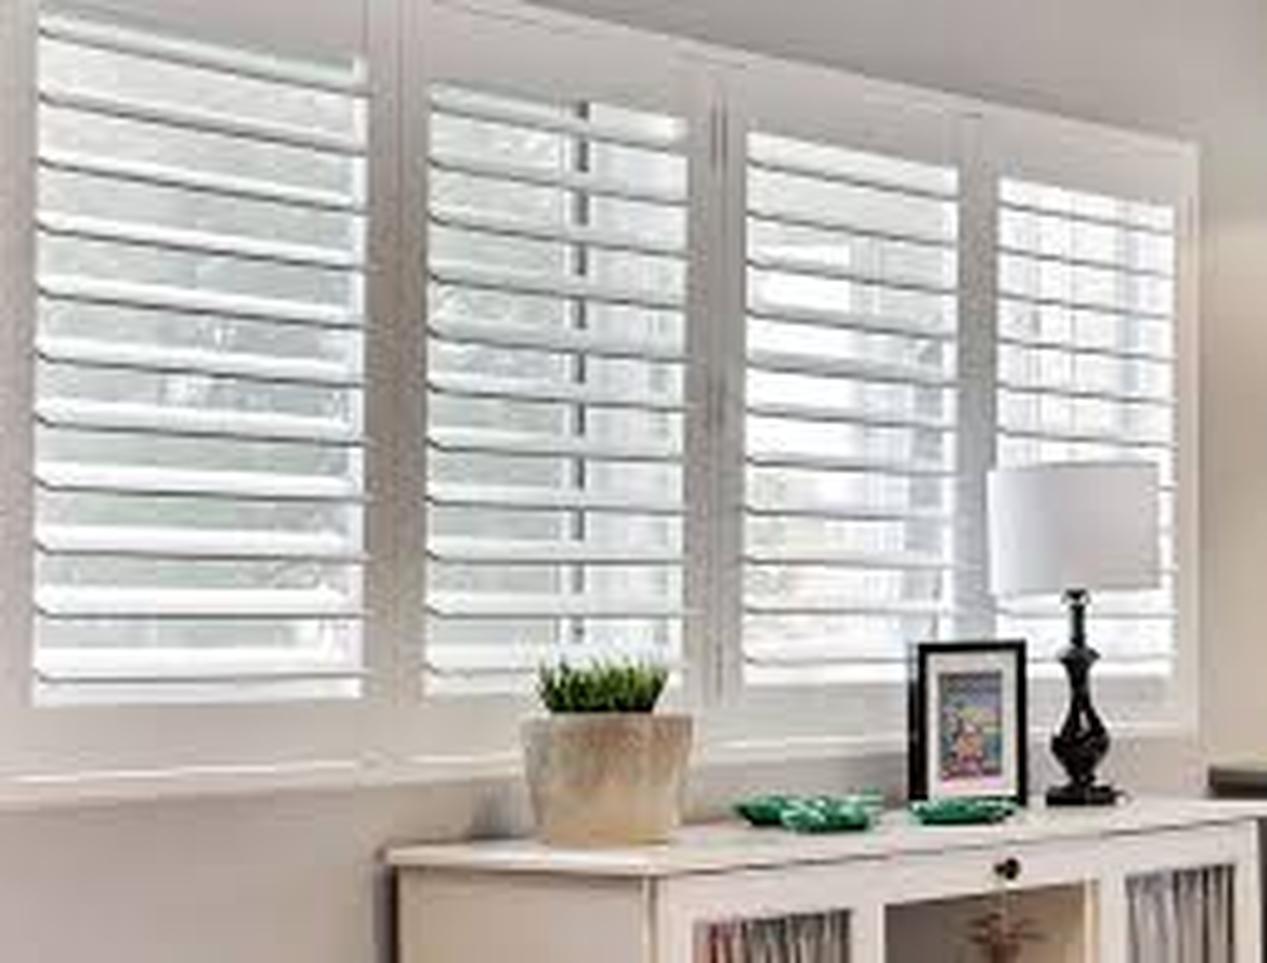 Reasons To Install Plantation Shutters